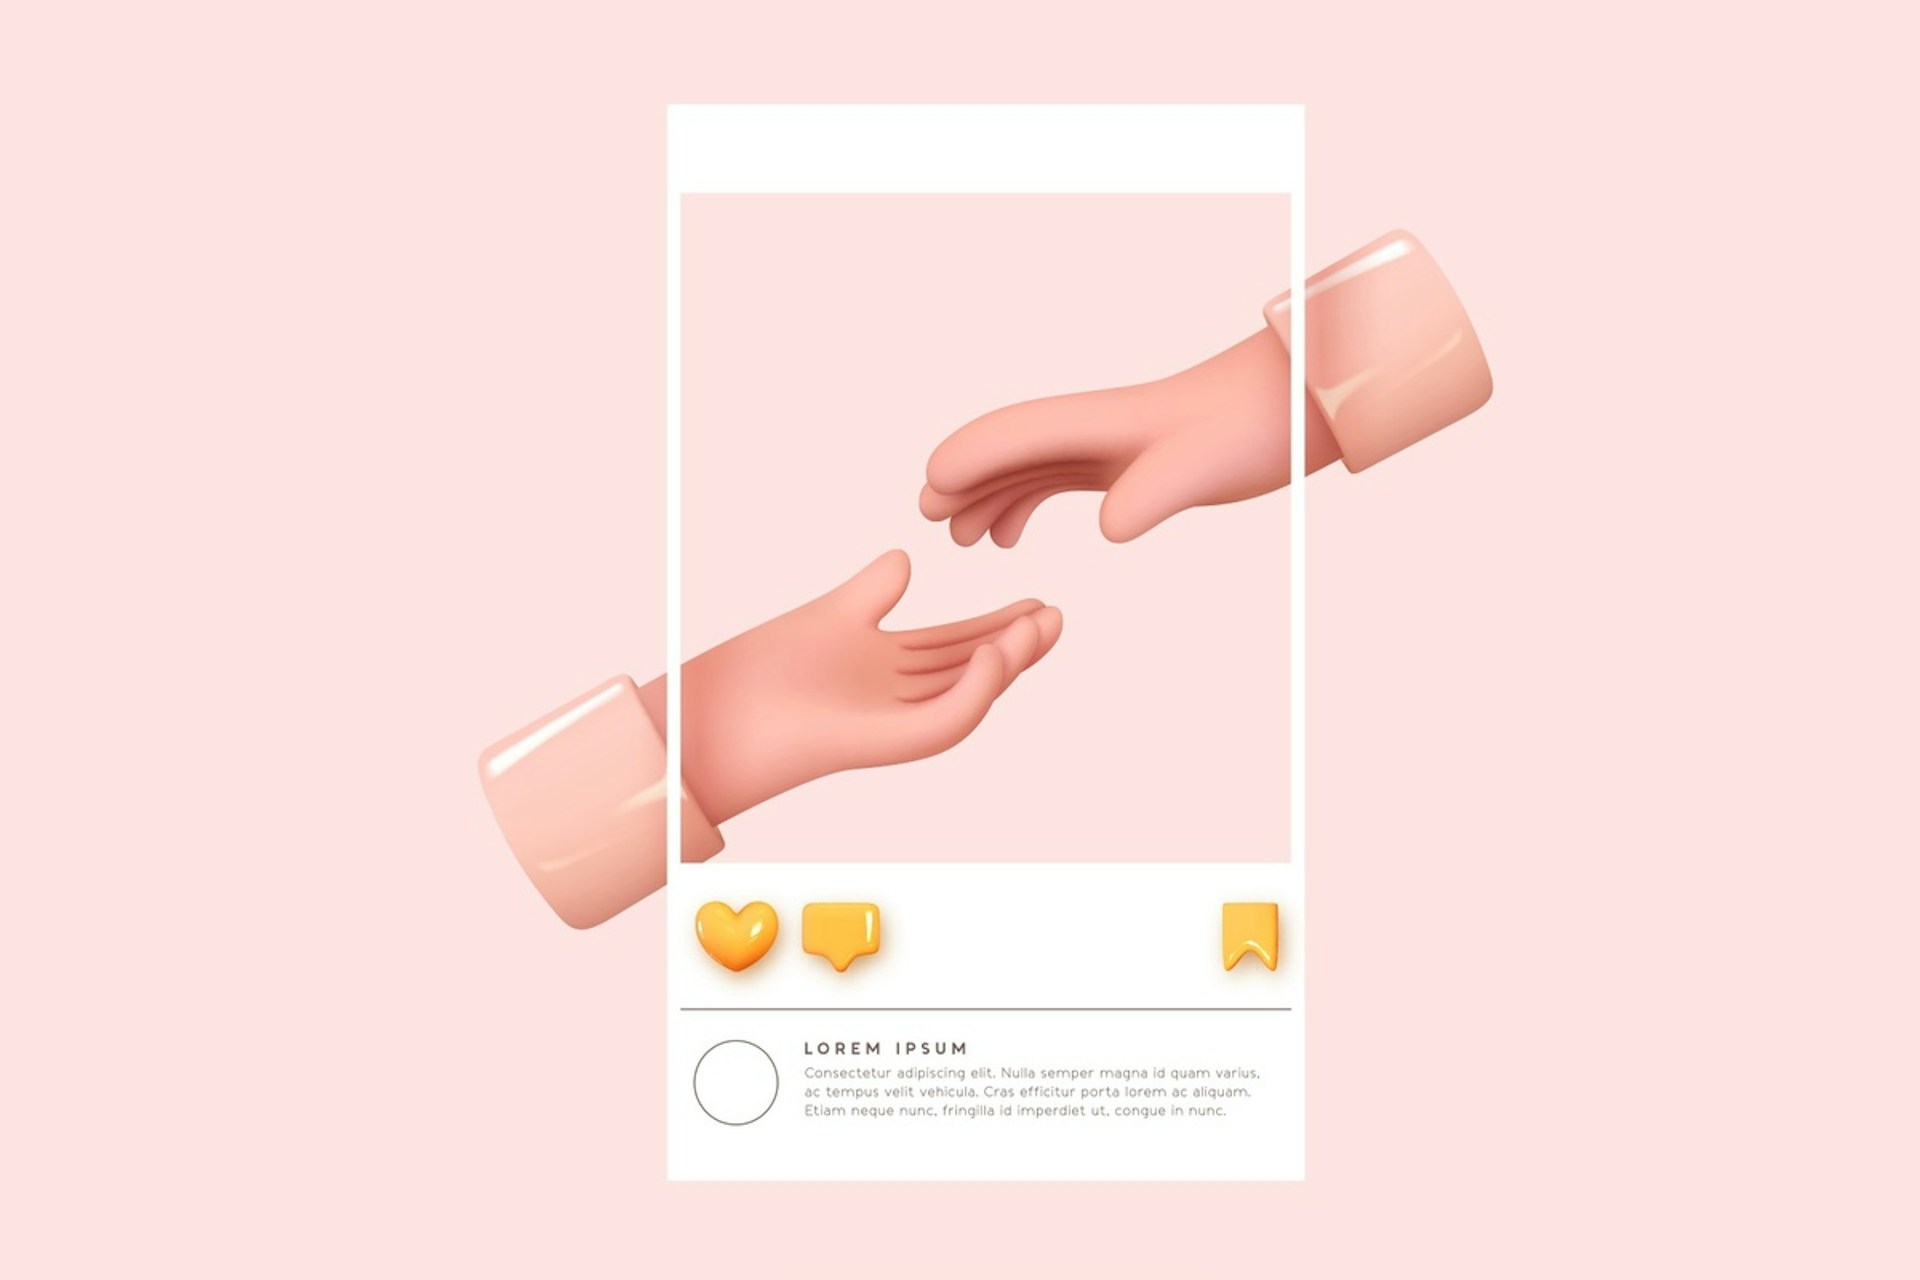 Two hands reaching out to one another in a social media post. 